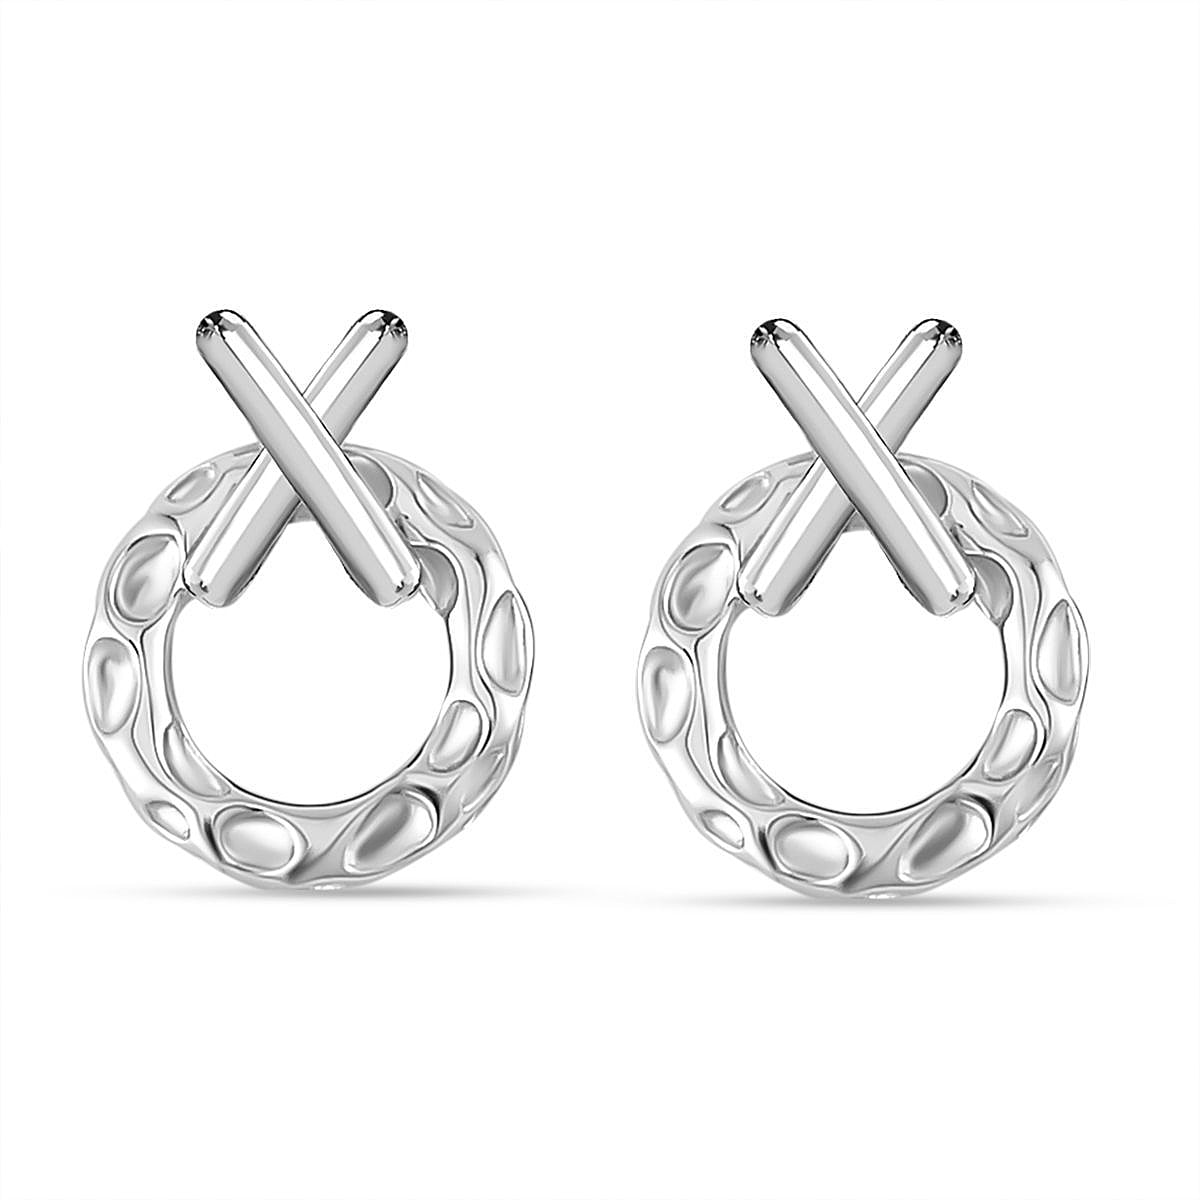 Rachel Galley Lattice Kiss Collection - Rhodium Overlay Sterling Silver Stud Earrings